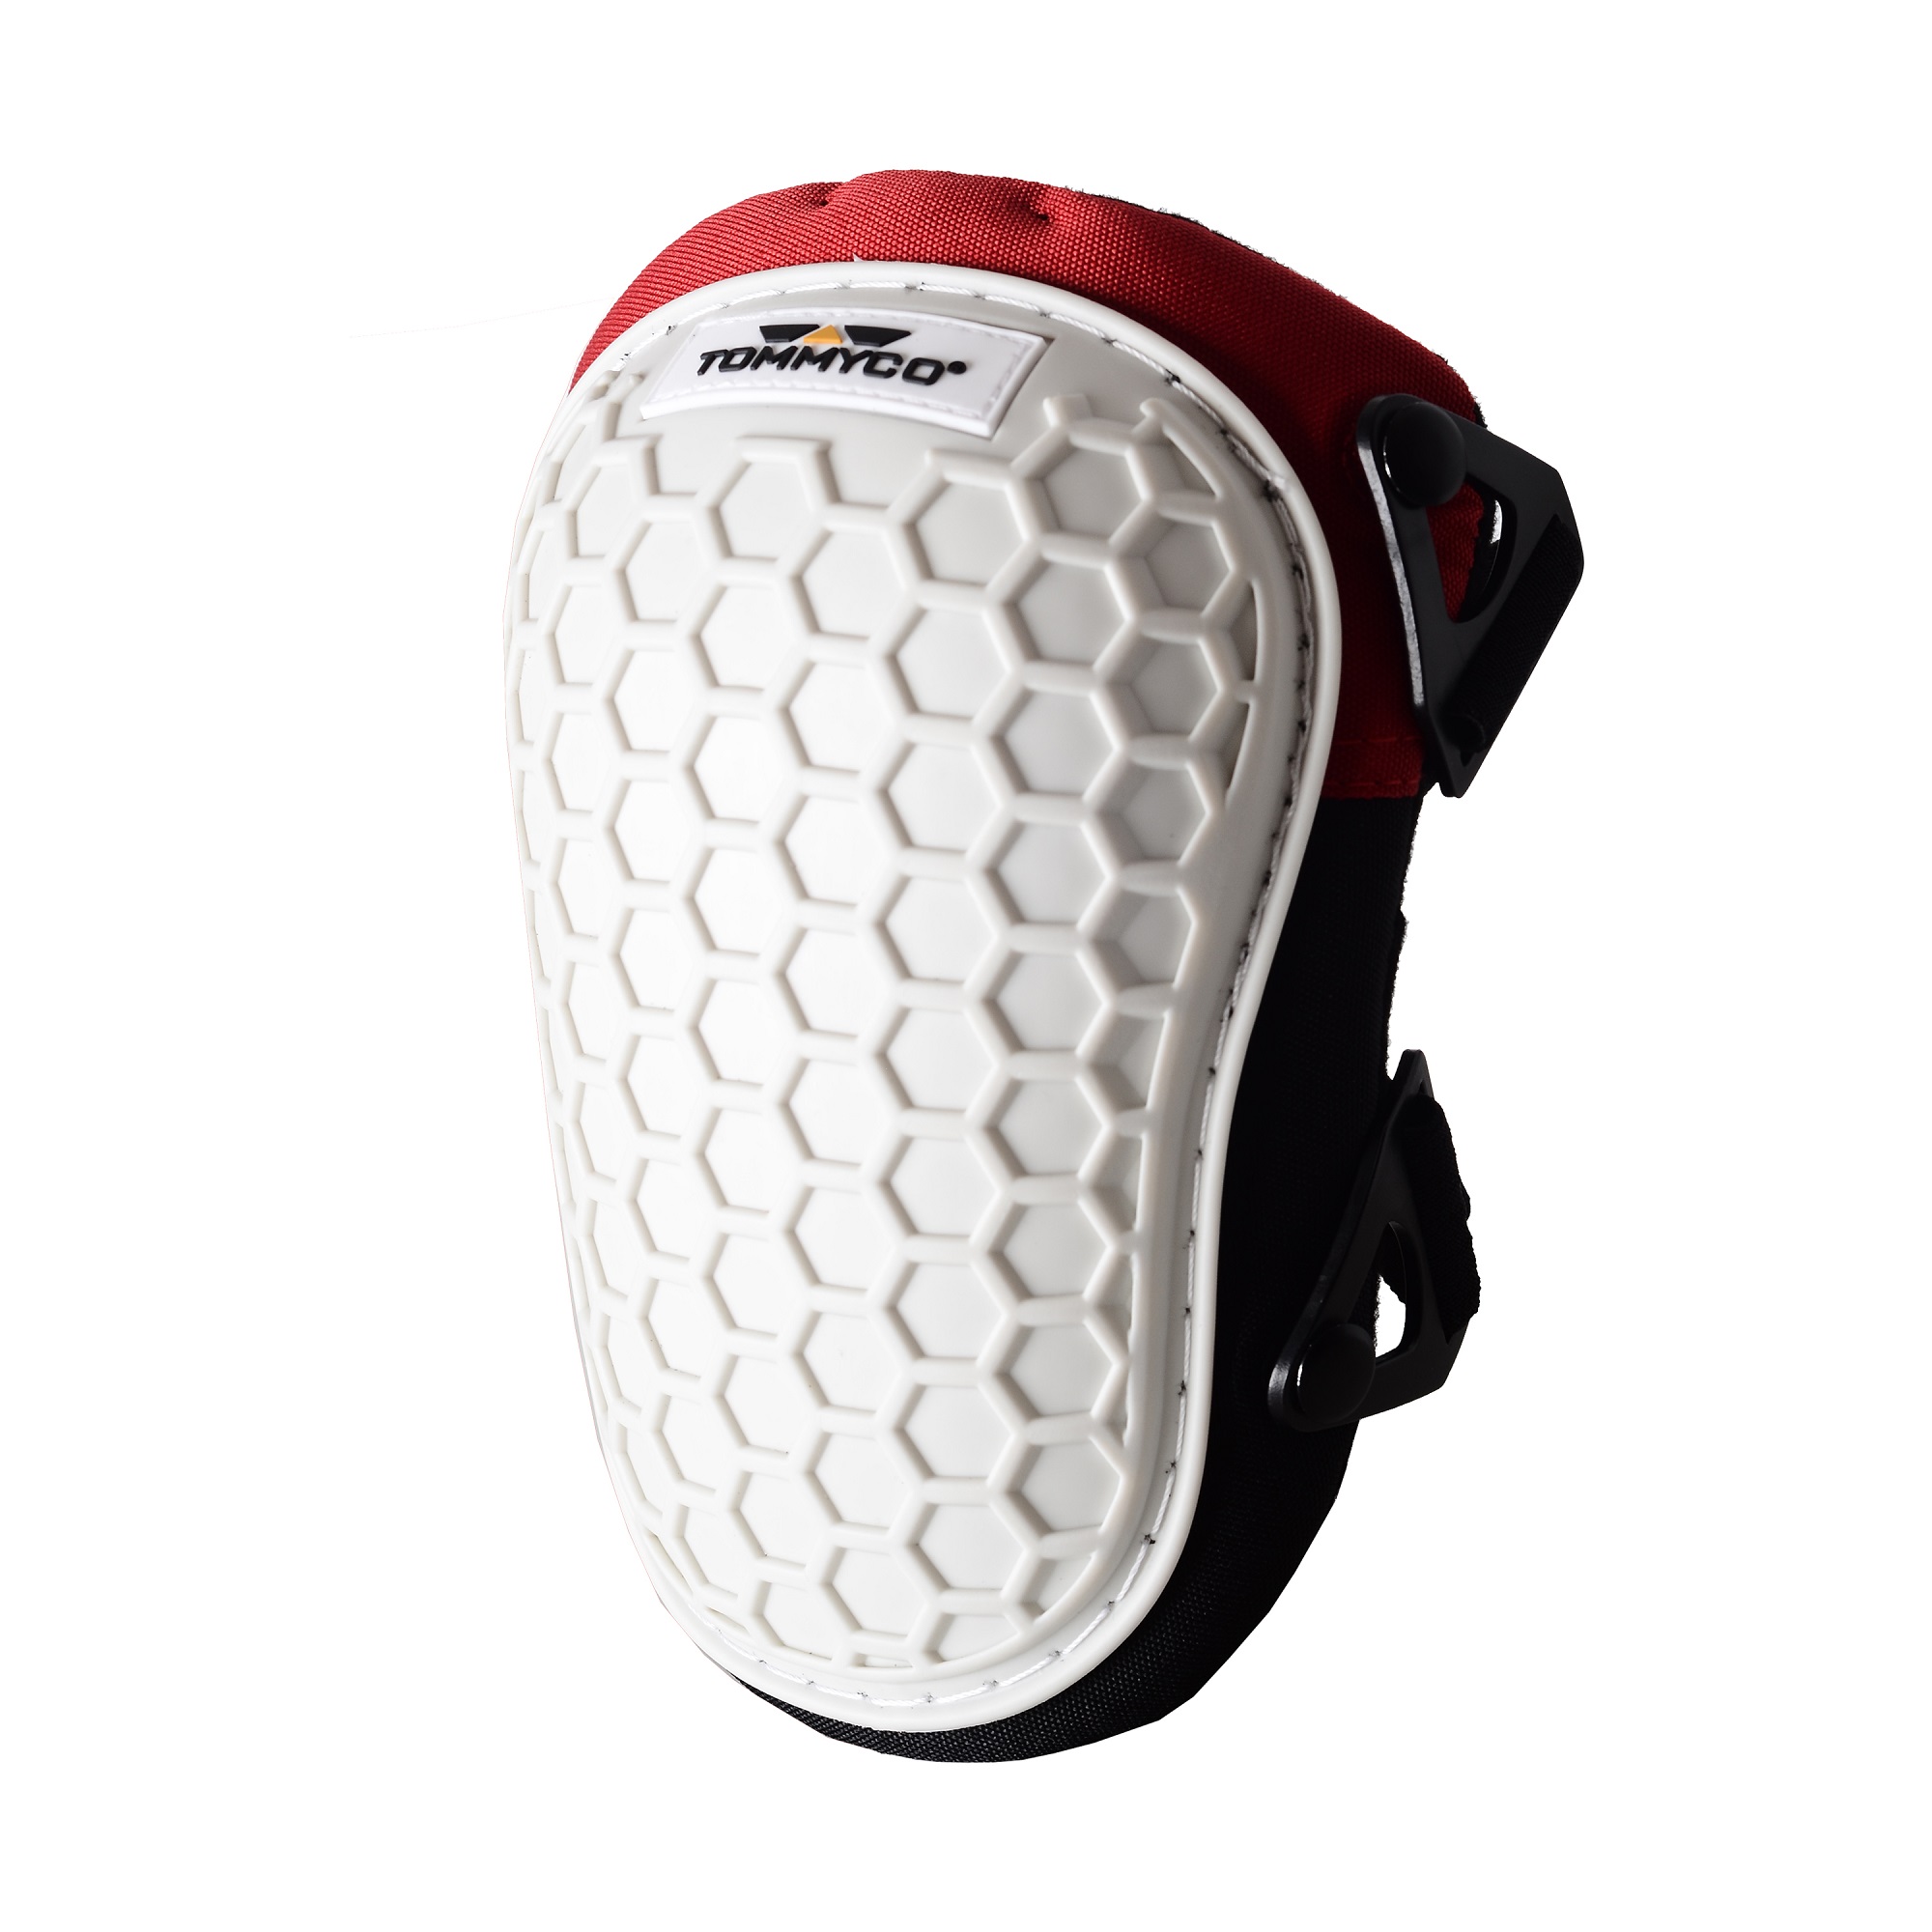 Tommyco Scandolus Shin Support Kneepads